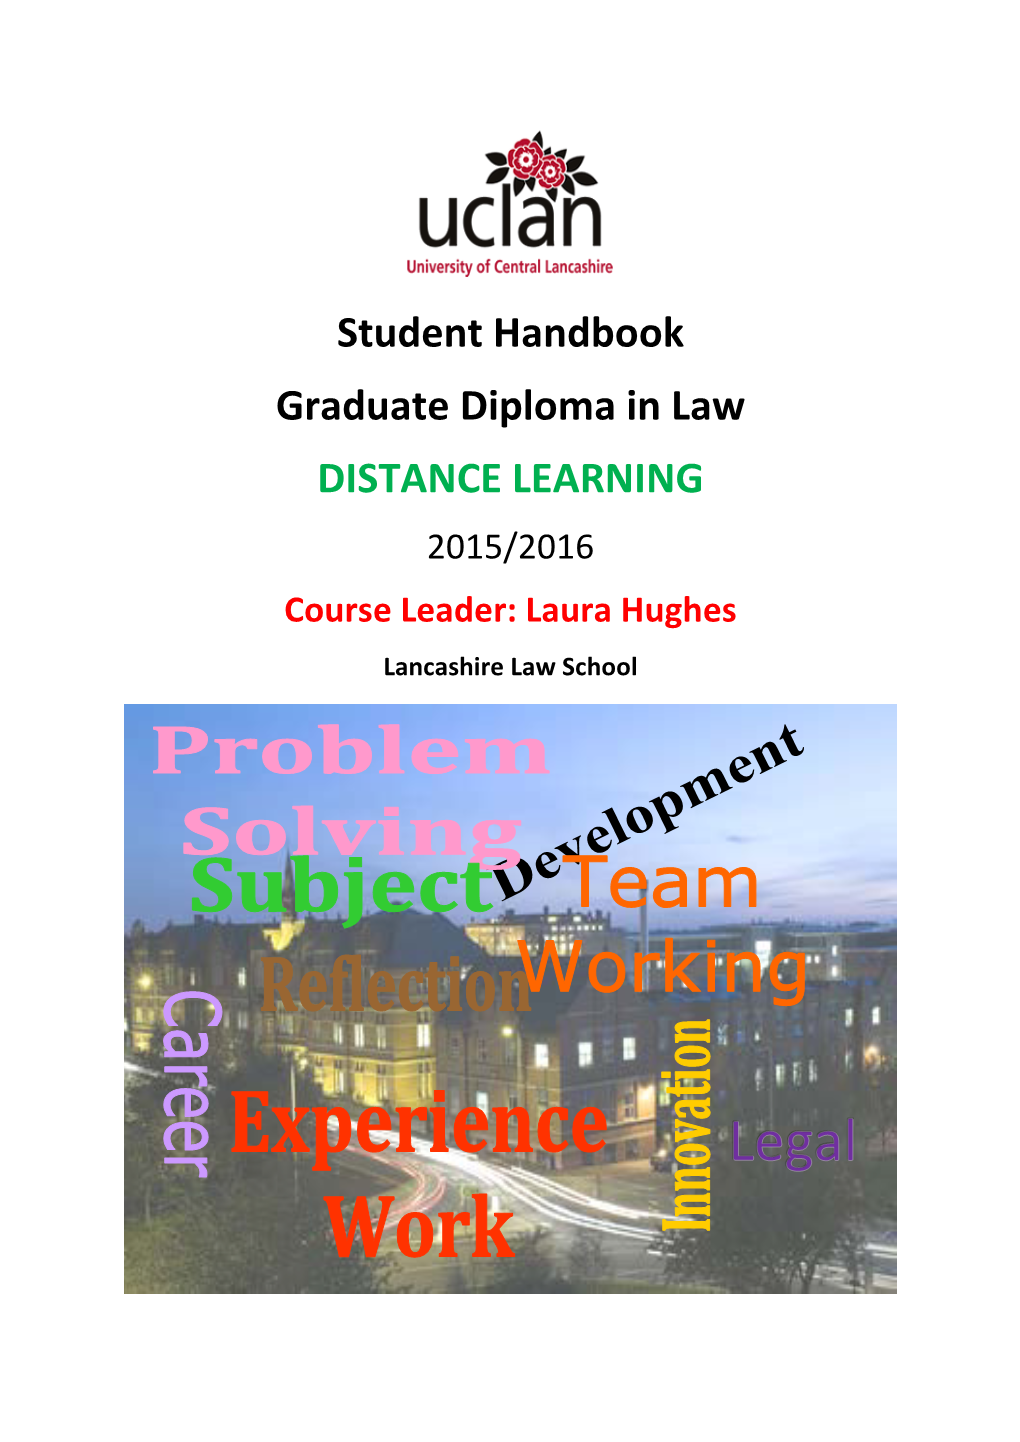 Student Handbook Graduate Diploma in Law DISTANCE LEARNING 2015/2016 Course Leader: Laura Hughes